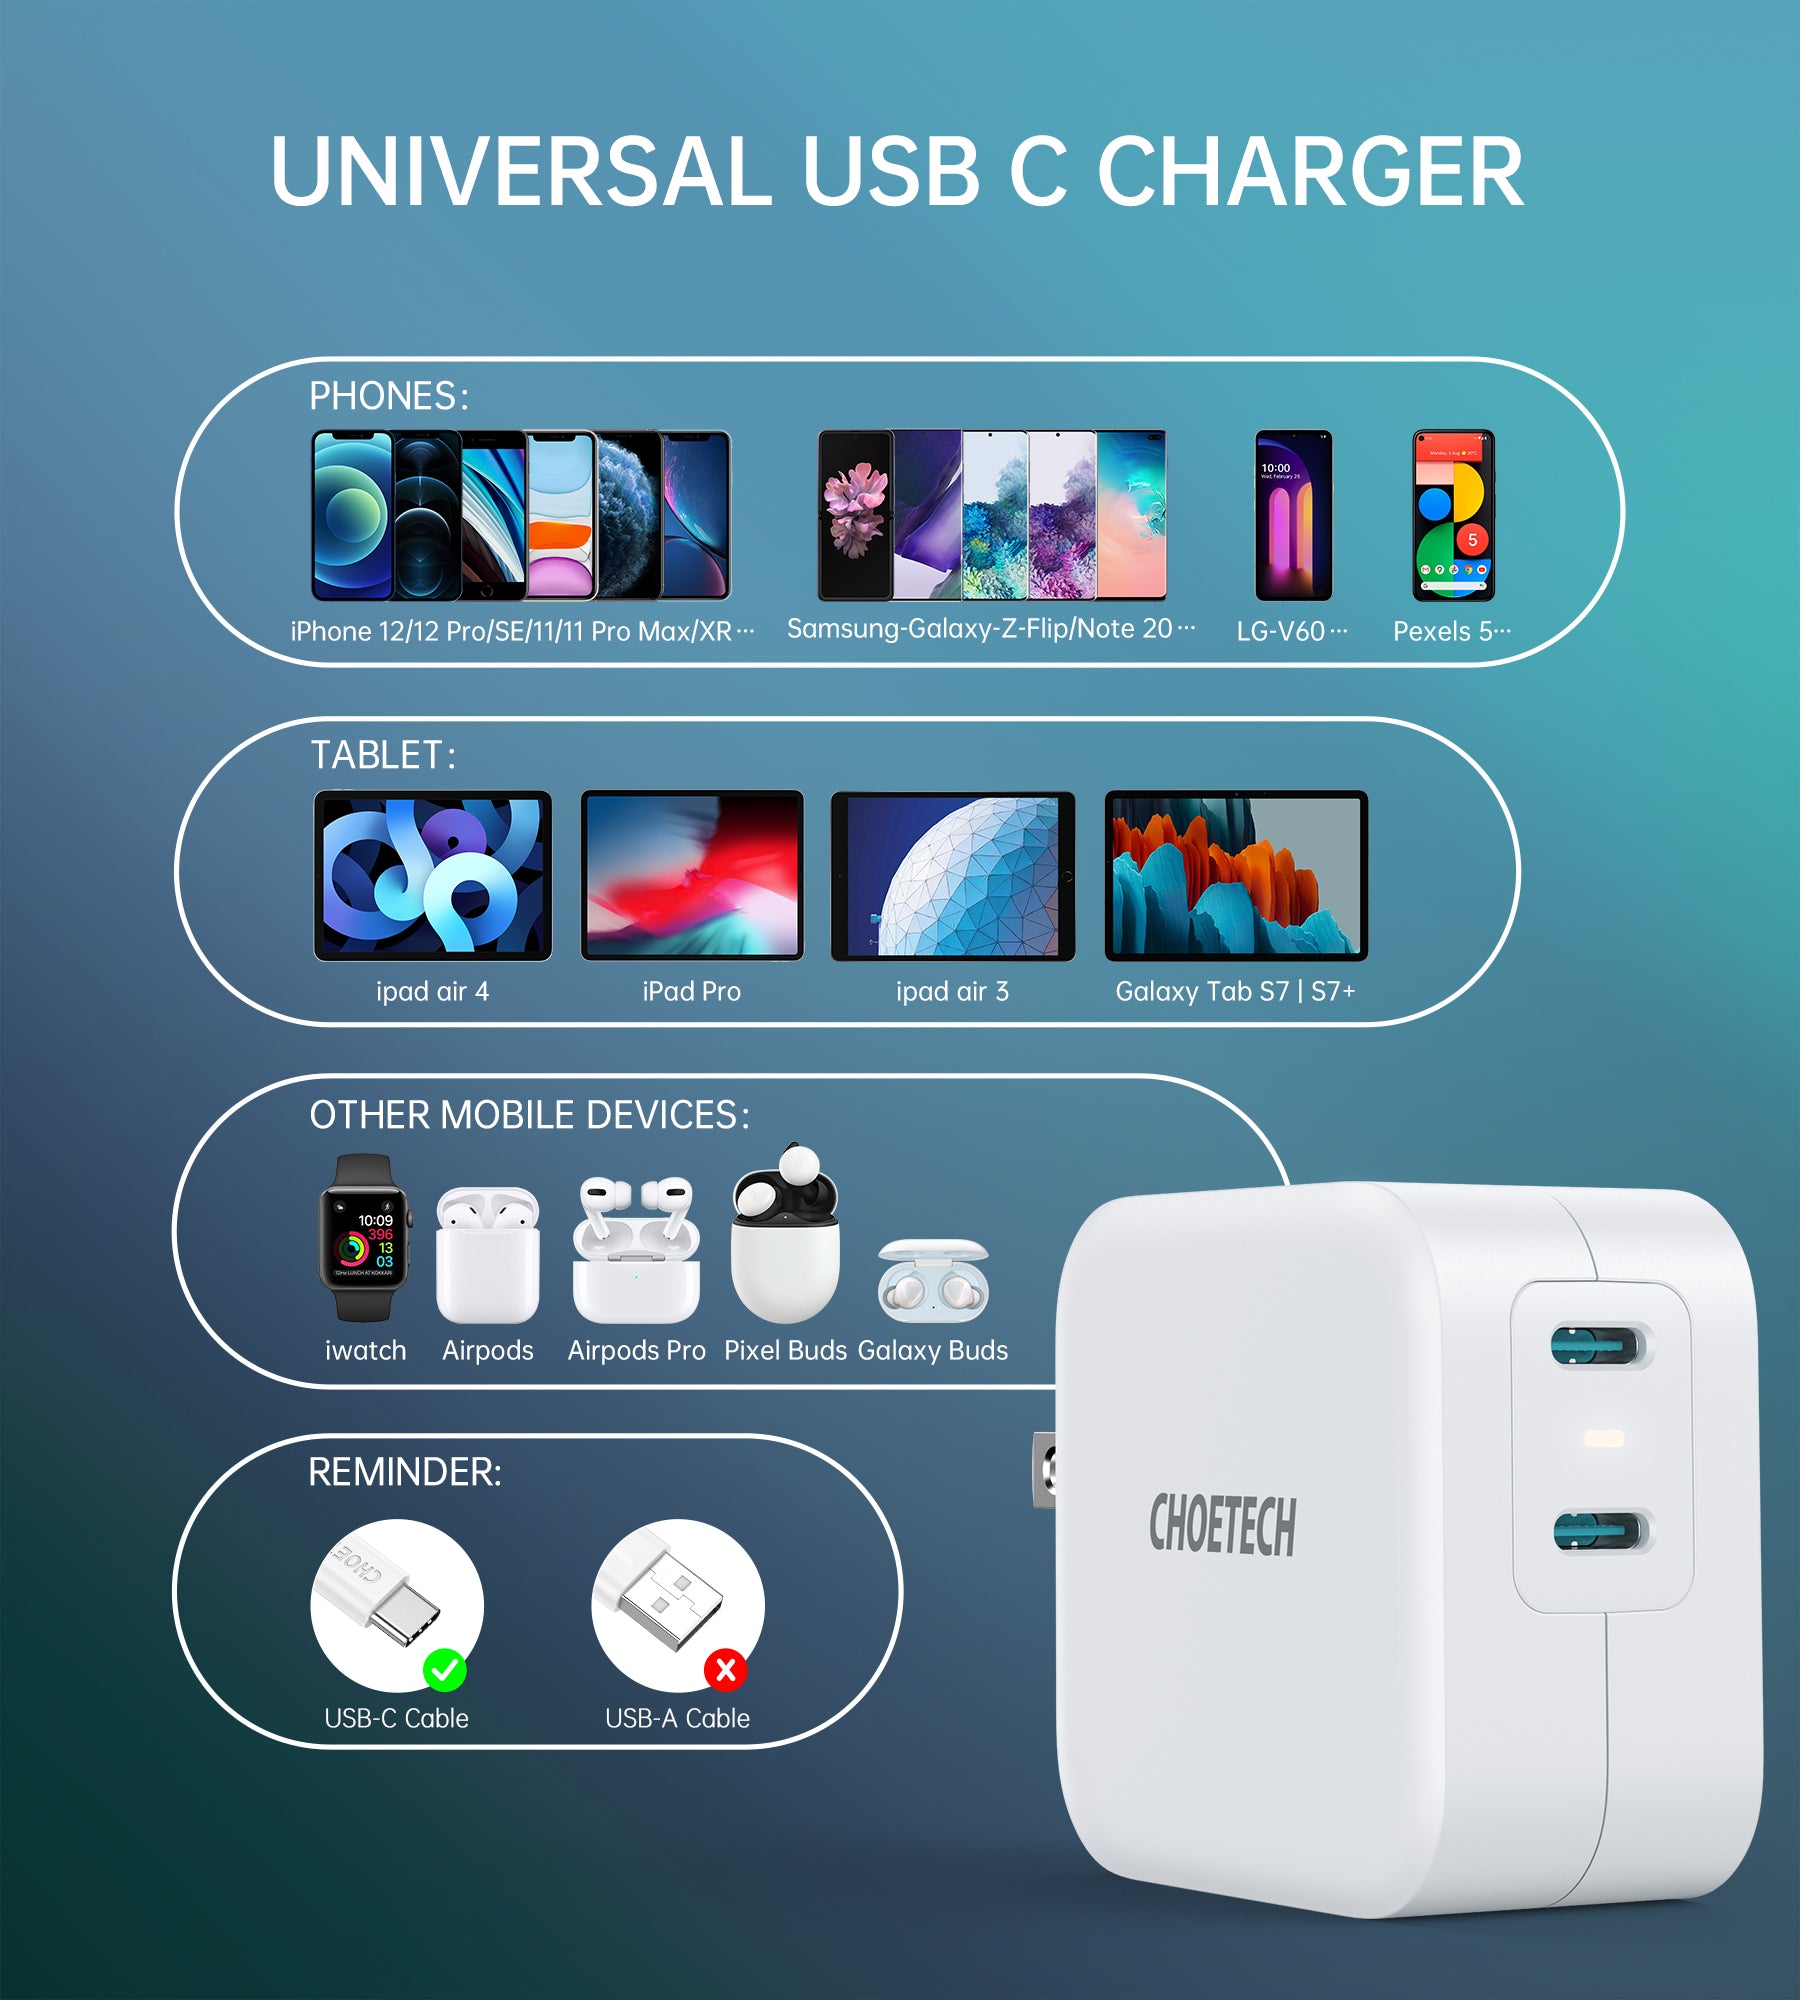 CHOETECH 40W Dual Fast USB C Charger 2-Port 20W PD 3.0 with Foldable Plug for iPhone 12 Pro Max/mini/11/SE,Galaxy, iPad Pro, AirPods, Nintendo Switch CHOETECH